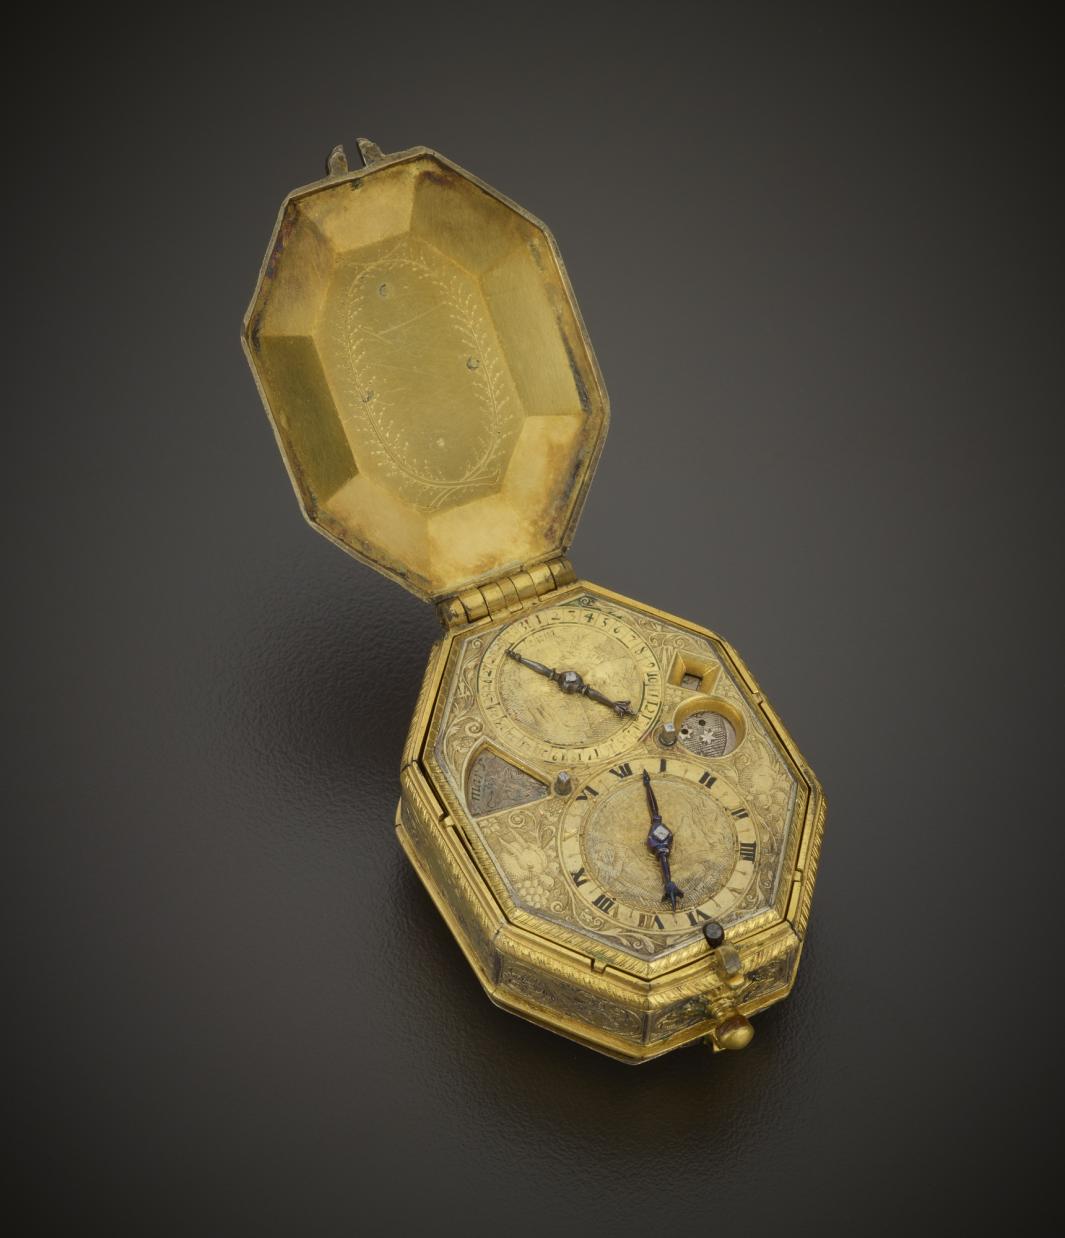 detailed silver gilt calendrical and astronomical pendant watch, circa 1625